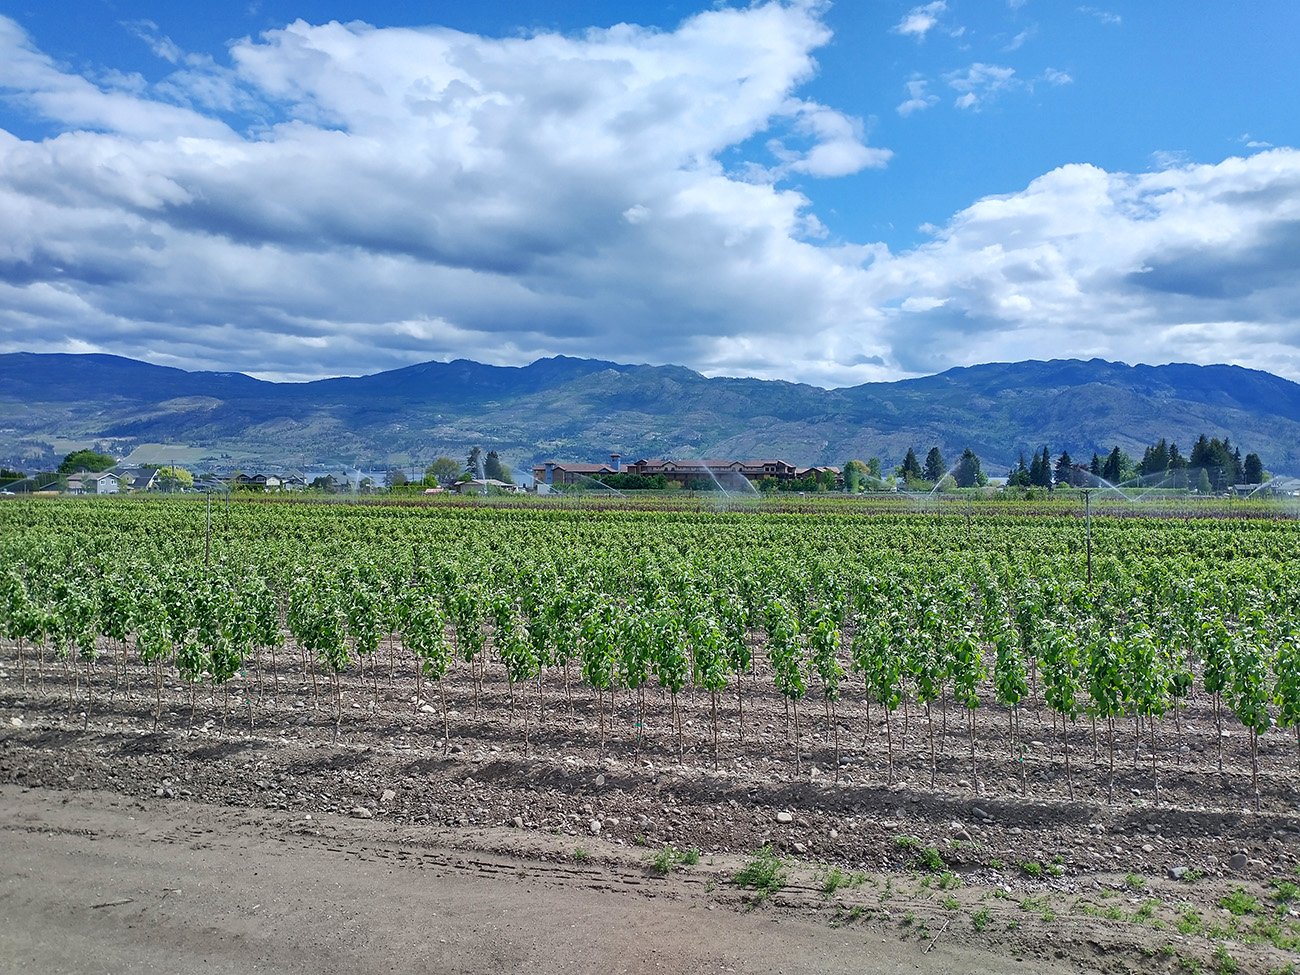 West Kelowna and Kelowna have several regions with huge vineyards and orchards.